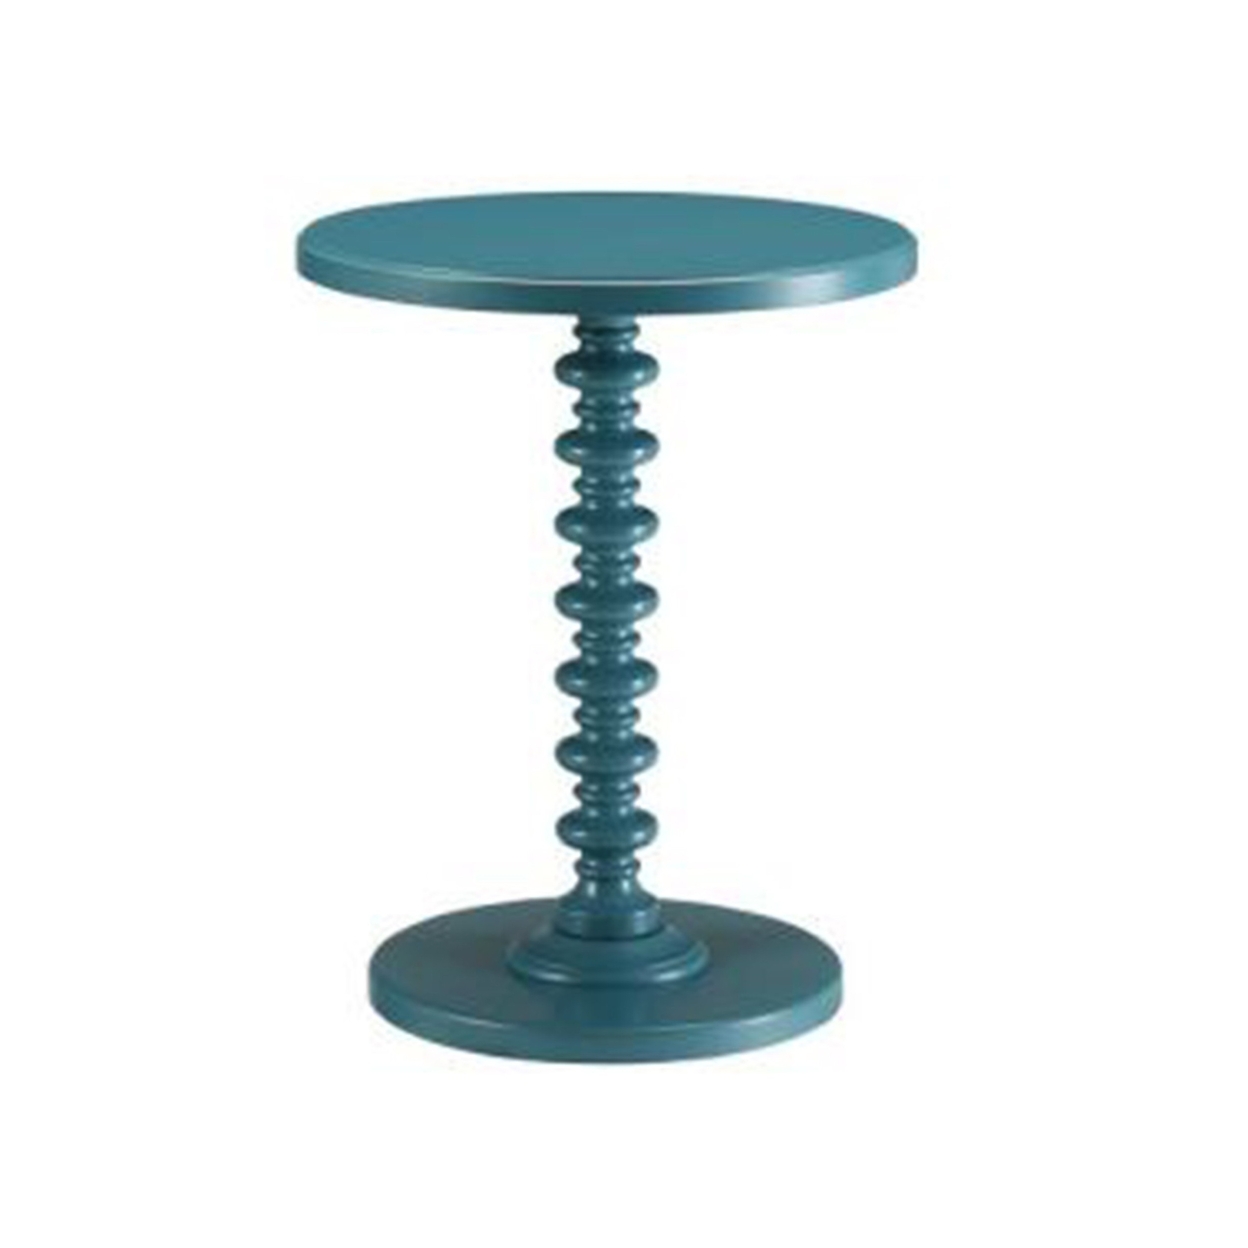 Astonishing Side Table With Round Top, Teal Blue- Saltoro Sherpi